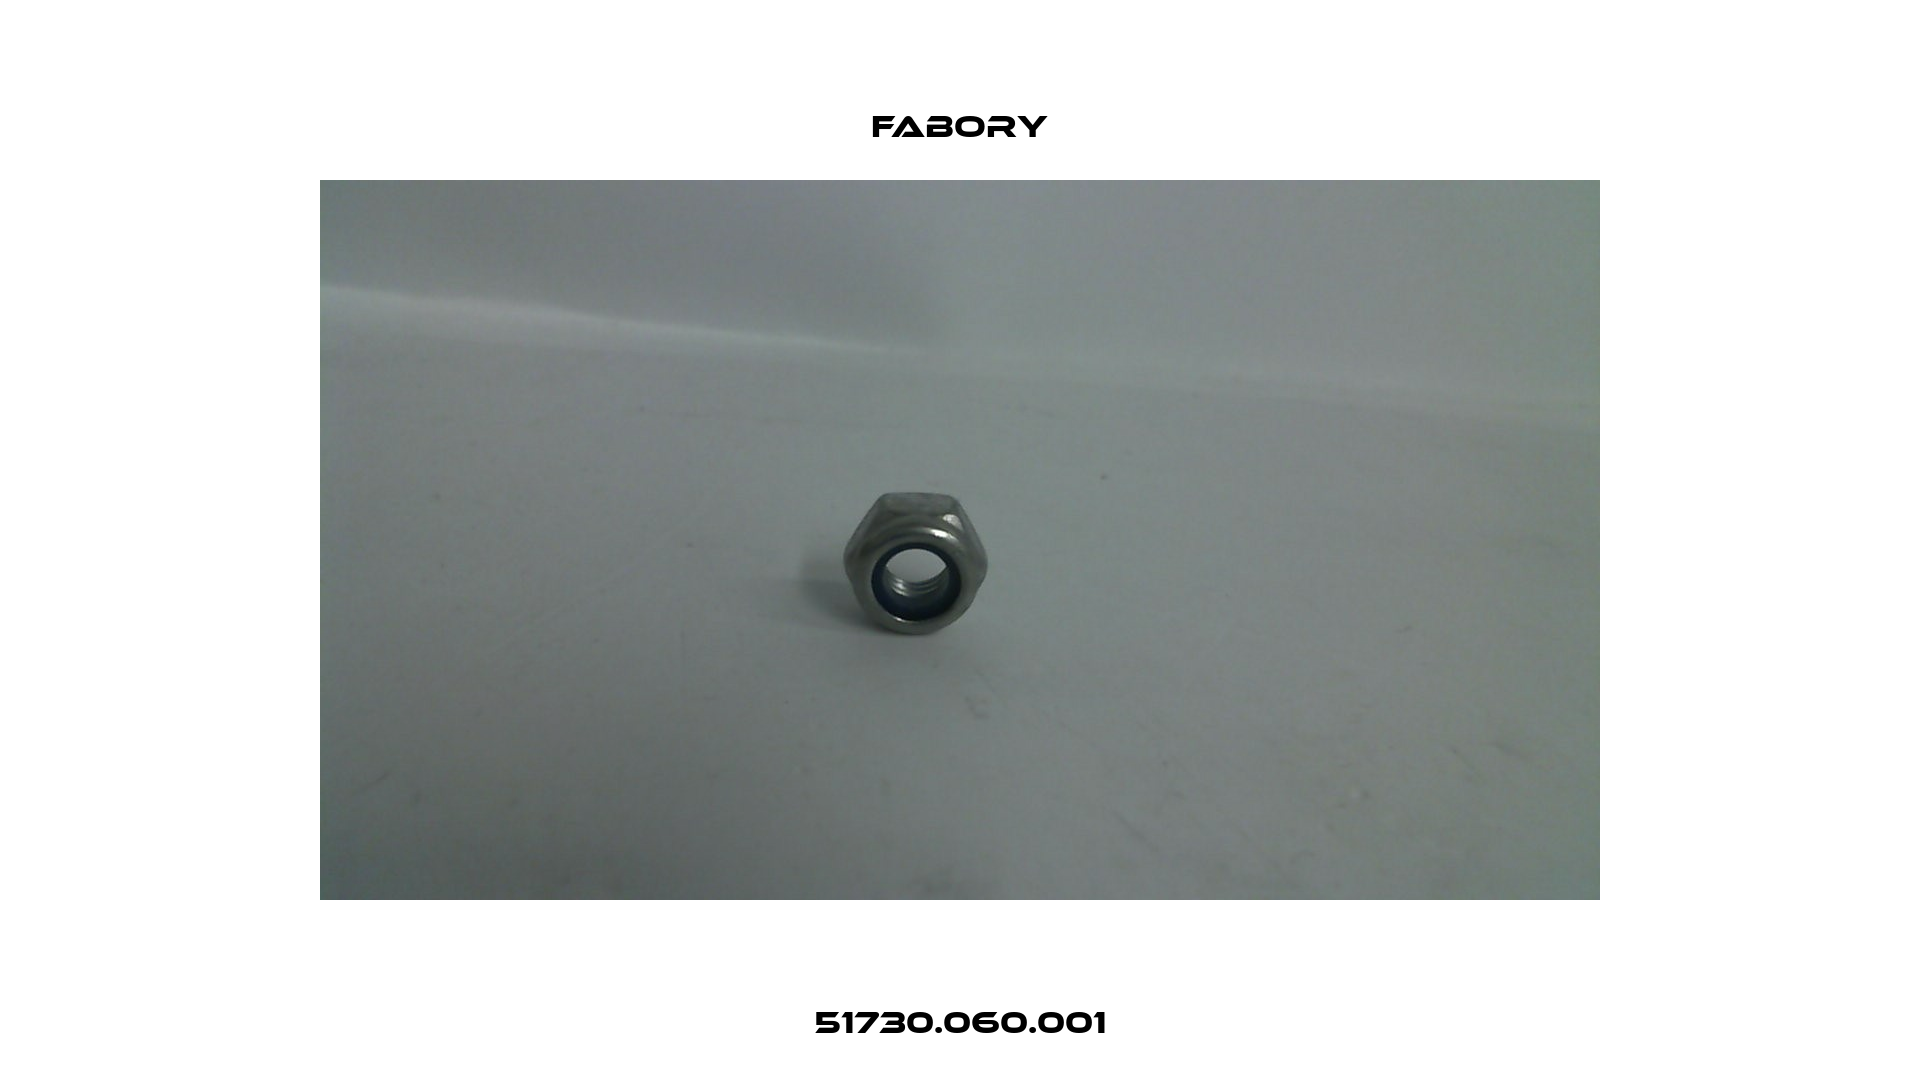 51730.060.001 Fabory